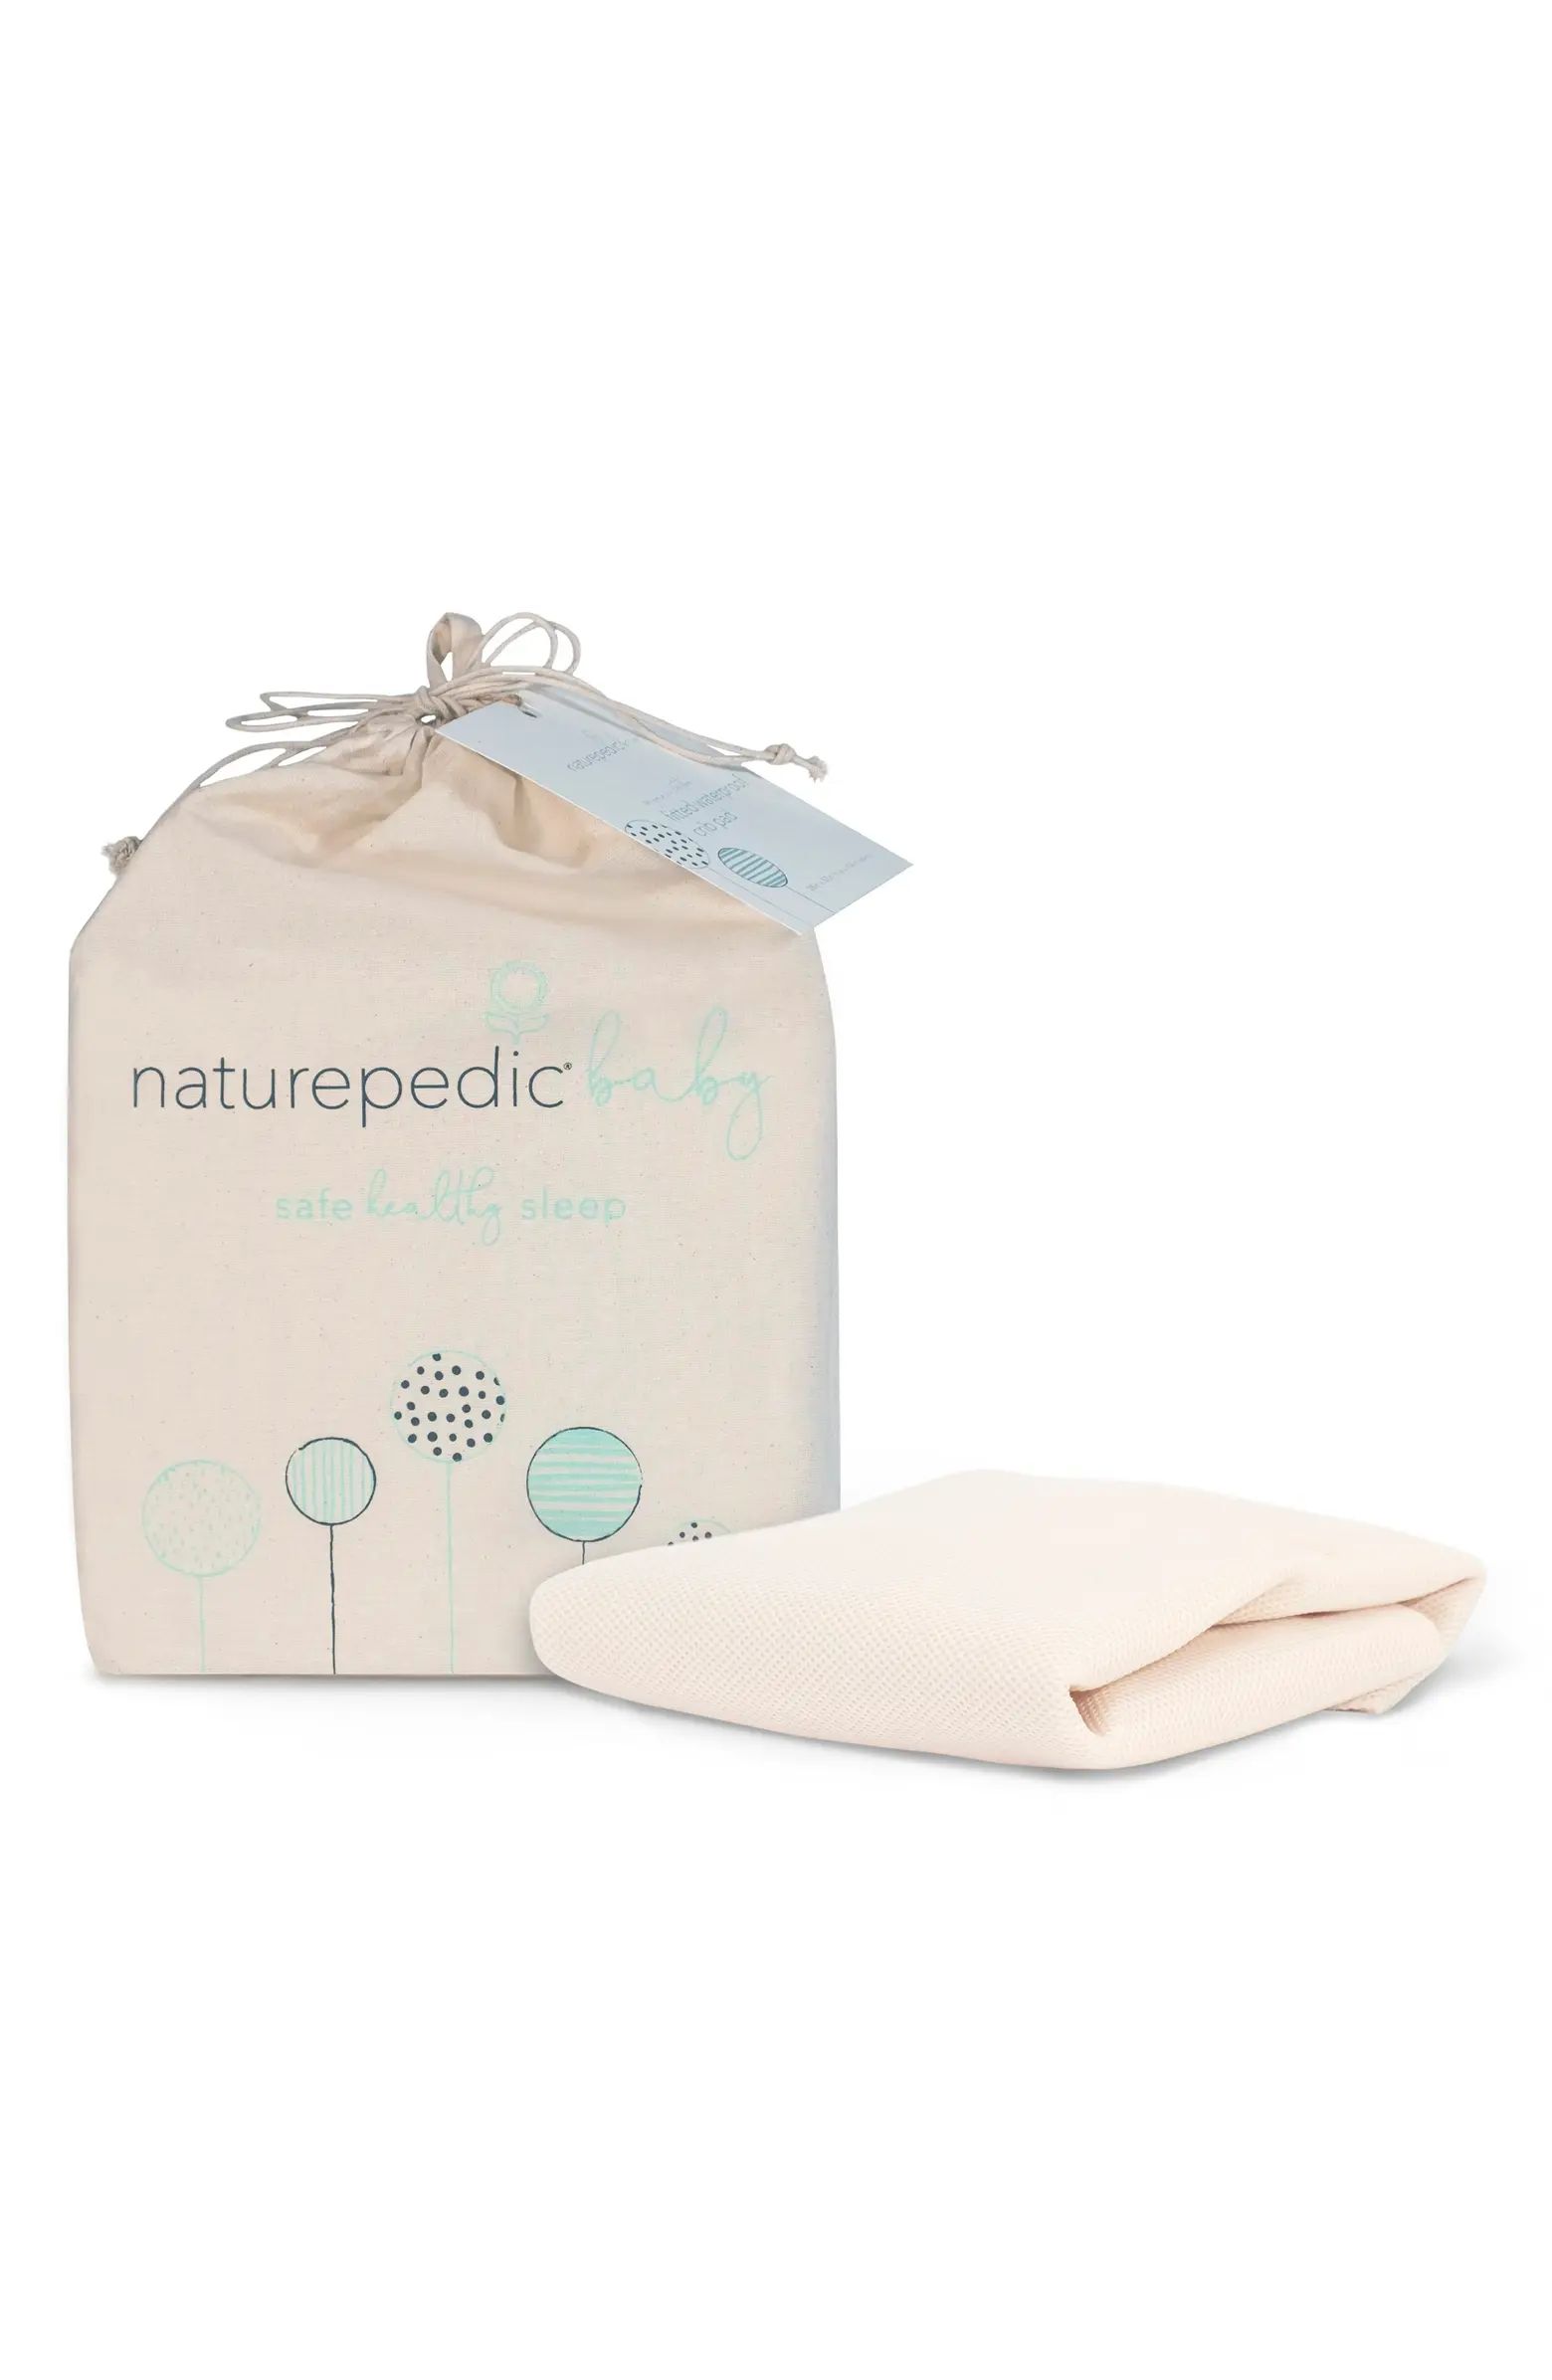 Naturepedic Organic Cotton Breathable Waterproof Fitted Crib Protector Pad | Nordstrom | Nordstrom